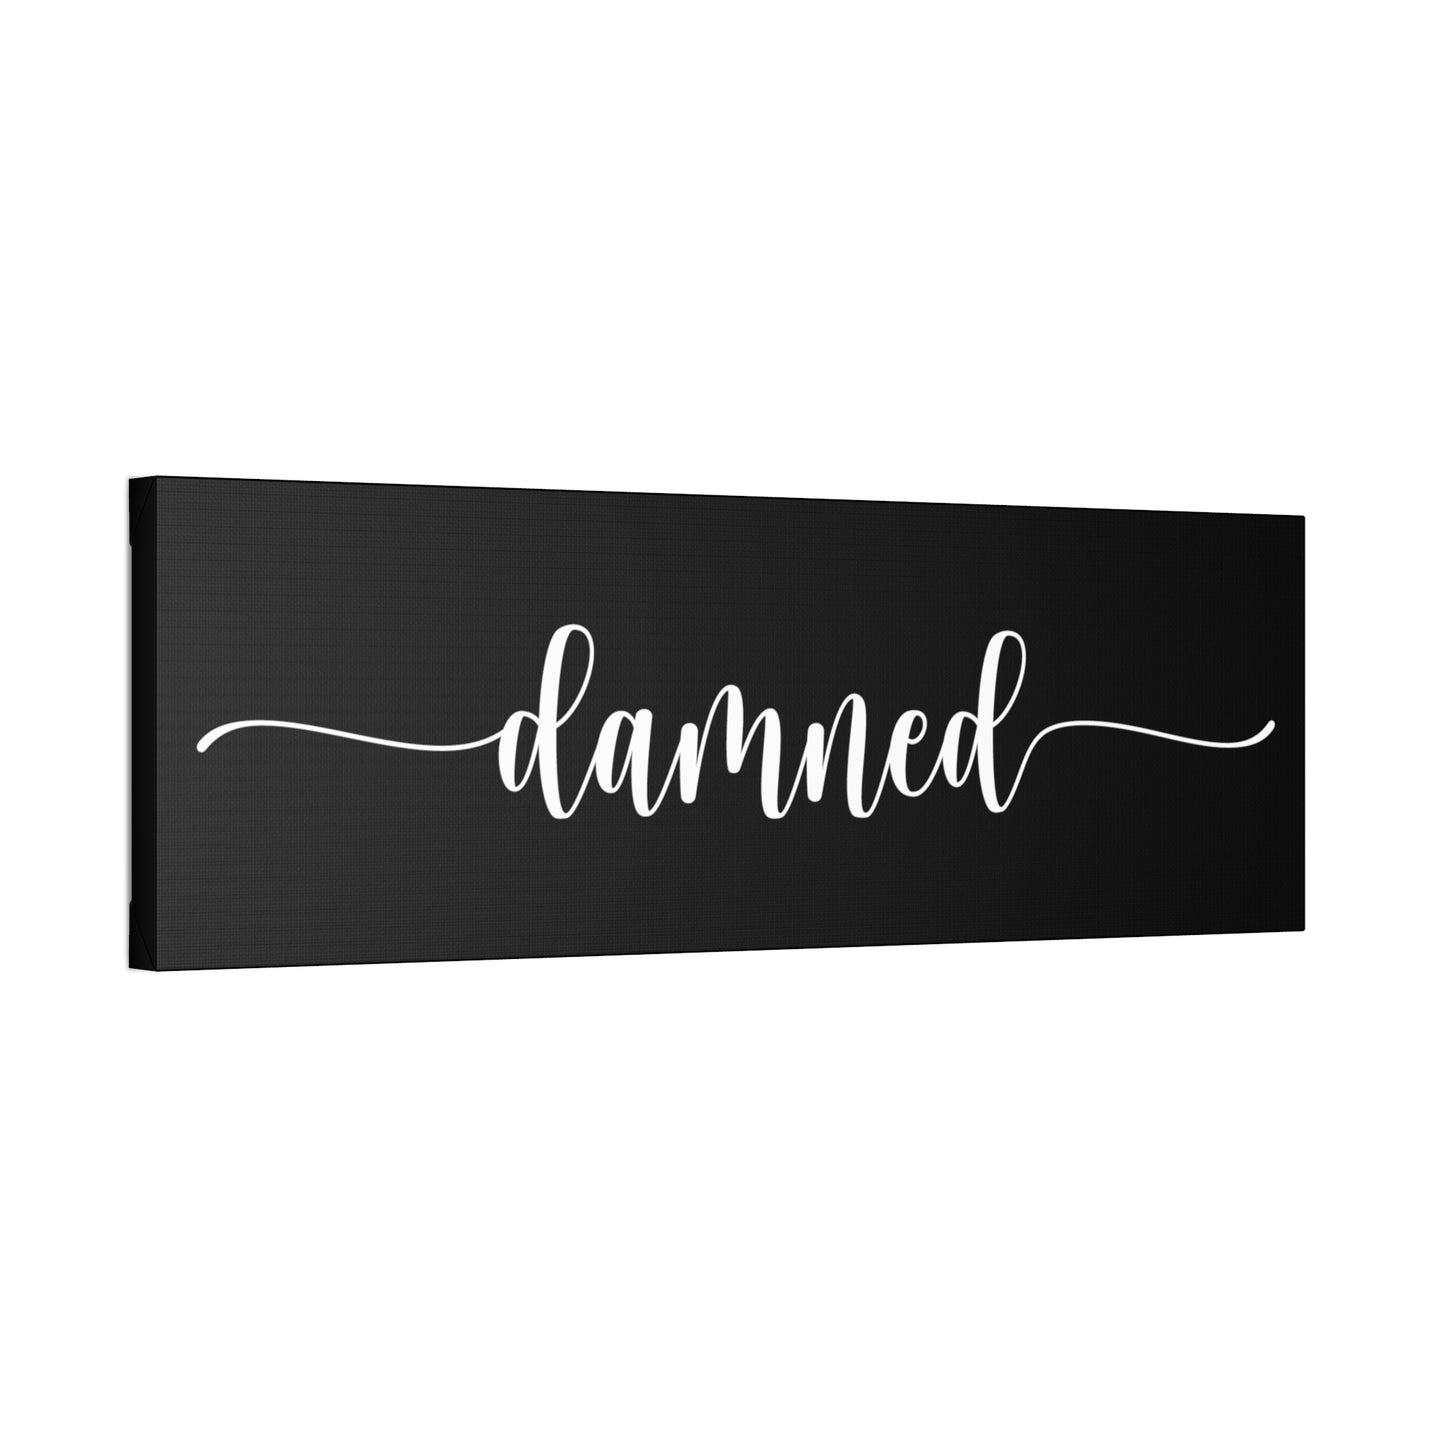 Damned (anti "Blessed" ) - Black Stretched Canvas